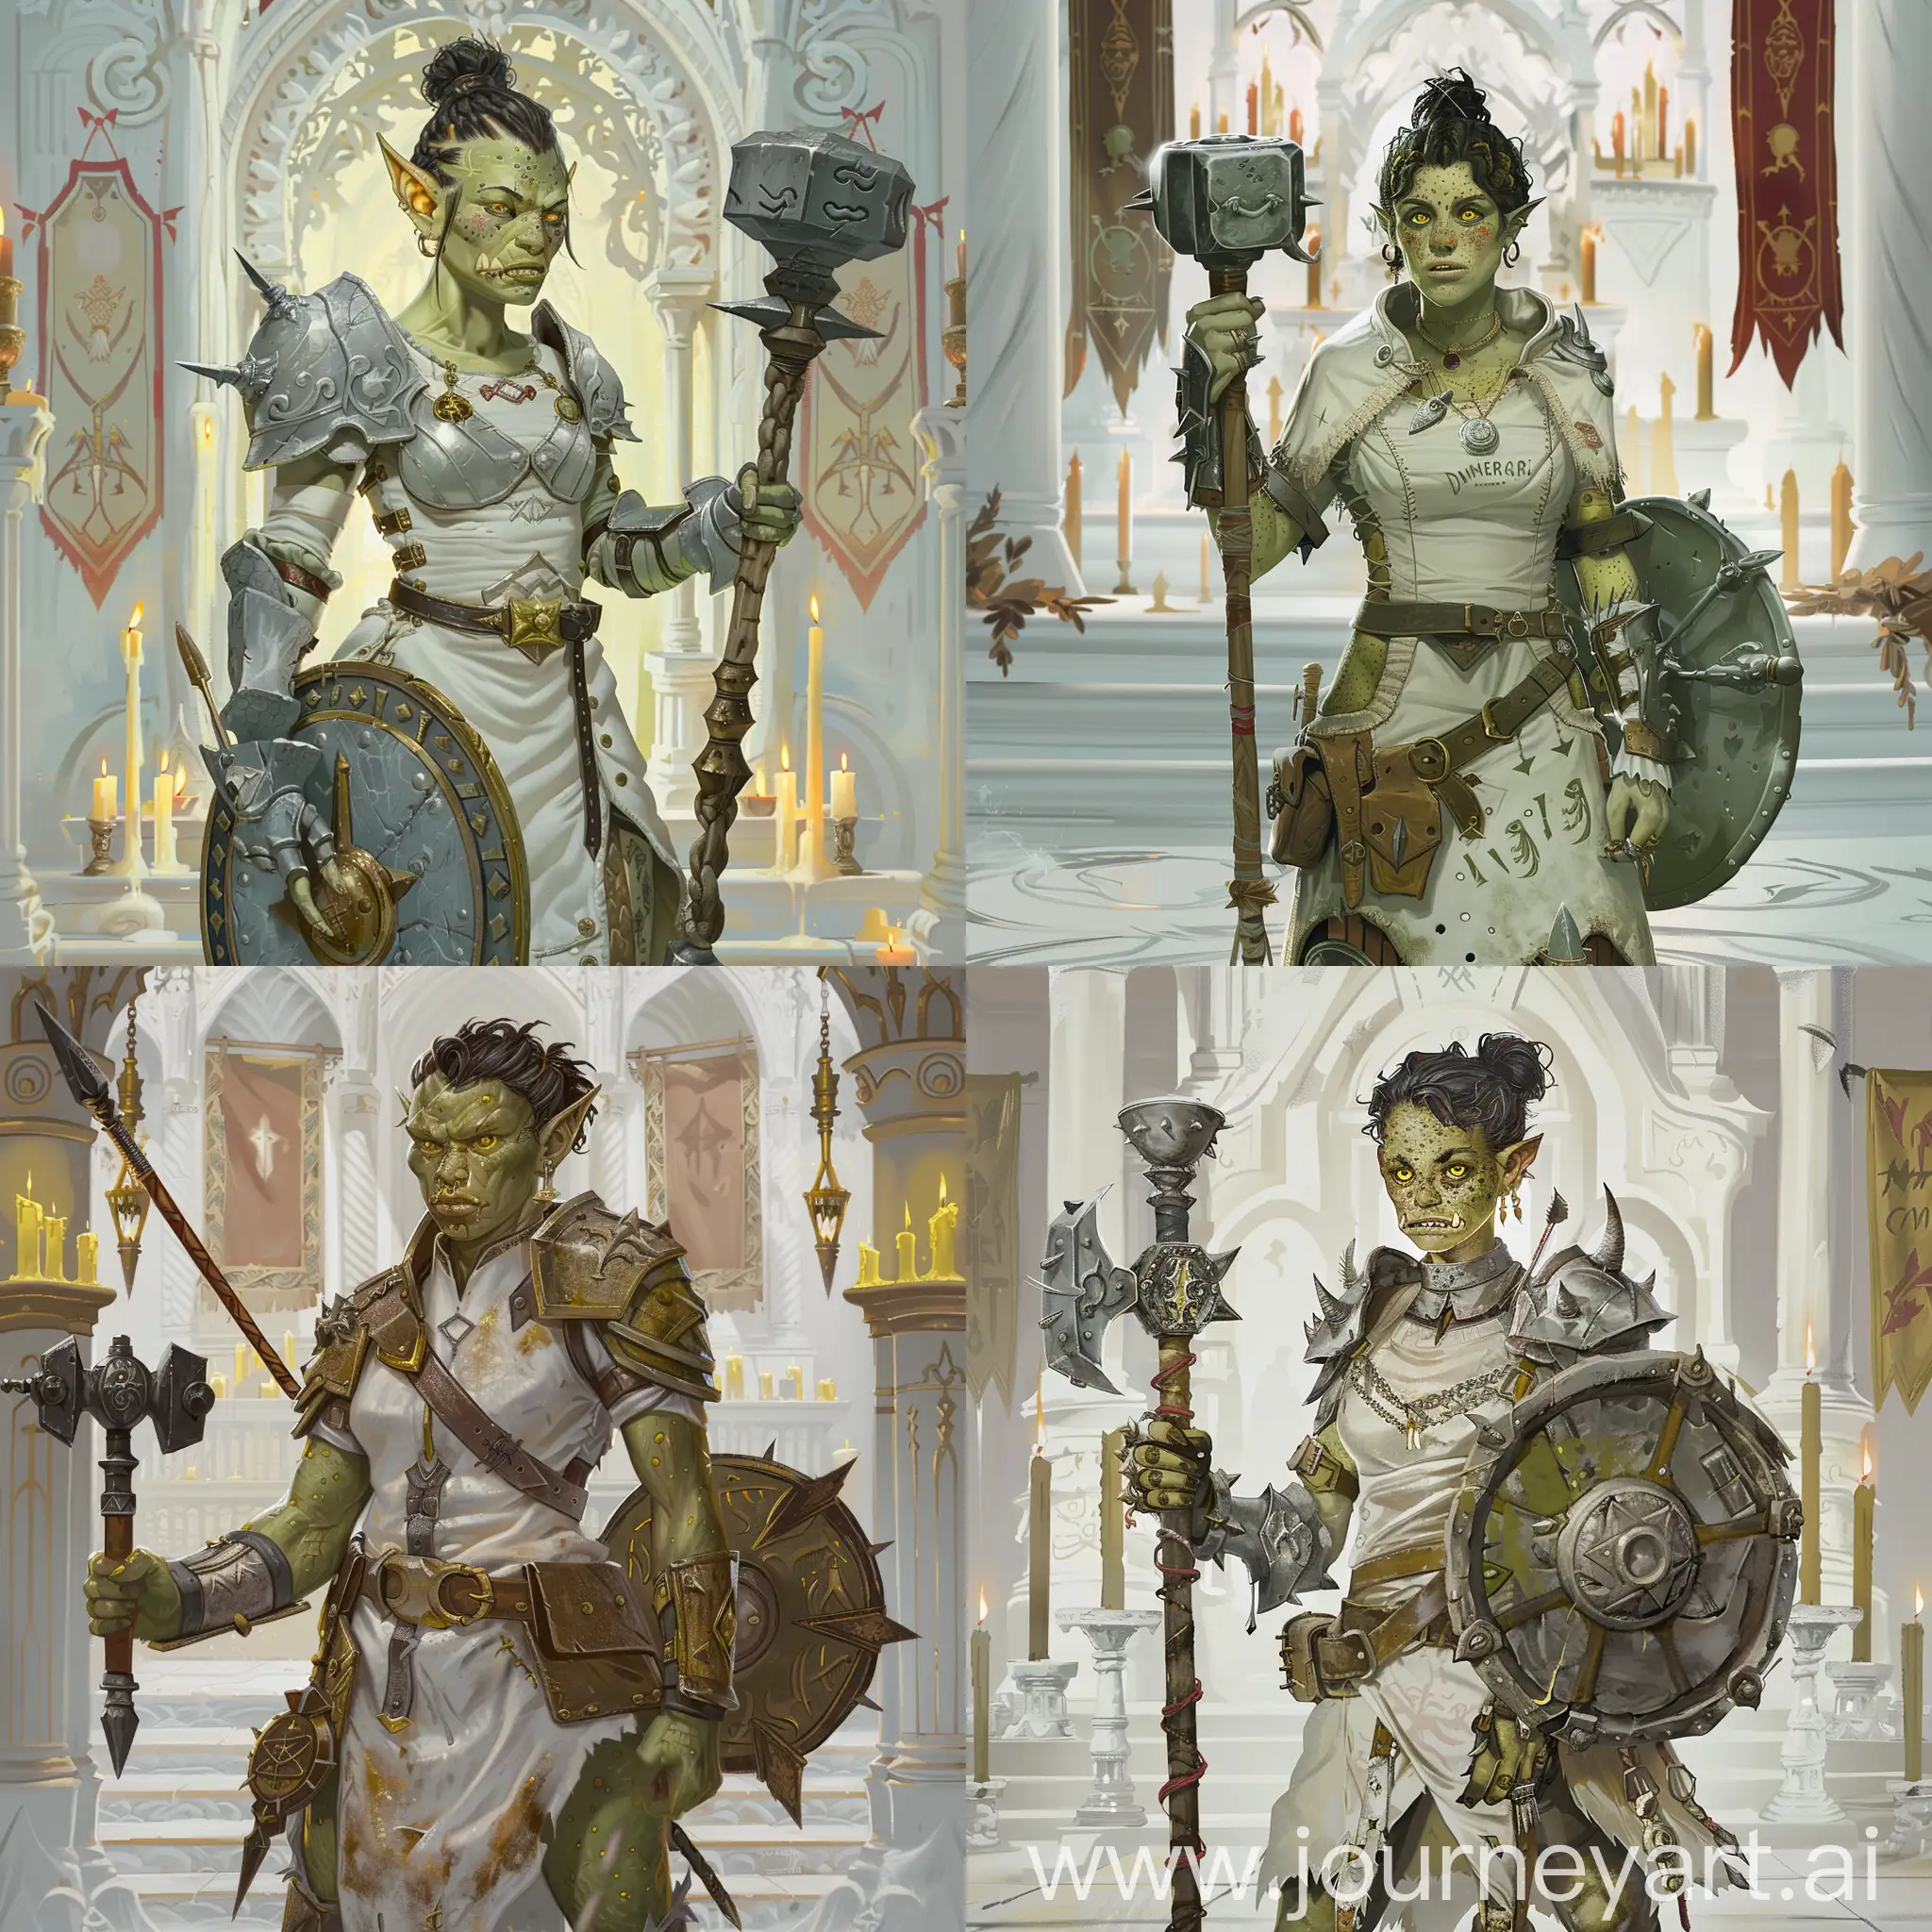 Draw a character from the Dungeons and Dragons universe according to the following description: she is female orc priest, dressed in light medieval warrior clothes. She has a mace and a shield. She has green skin with freckles, yellow eyes, short black hair with little braid. Sharp fangs are visible from under the lower lip. White temple, candles and tapestries on background